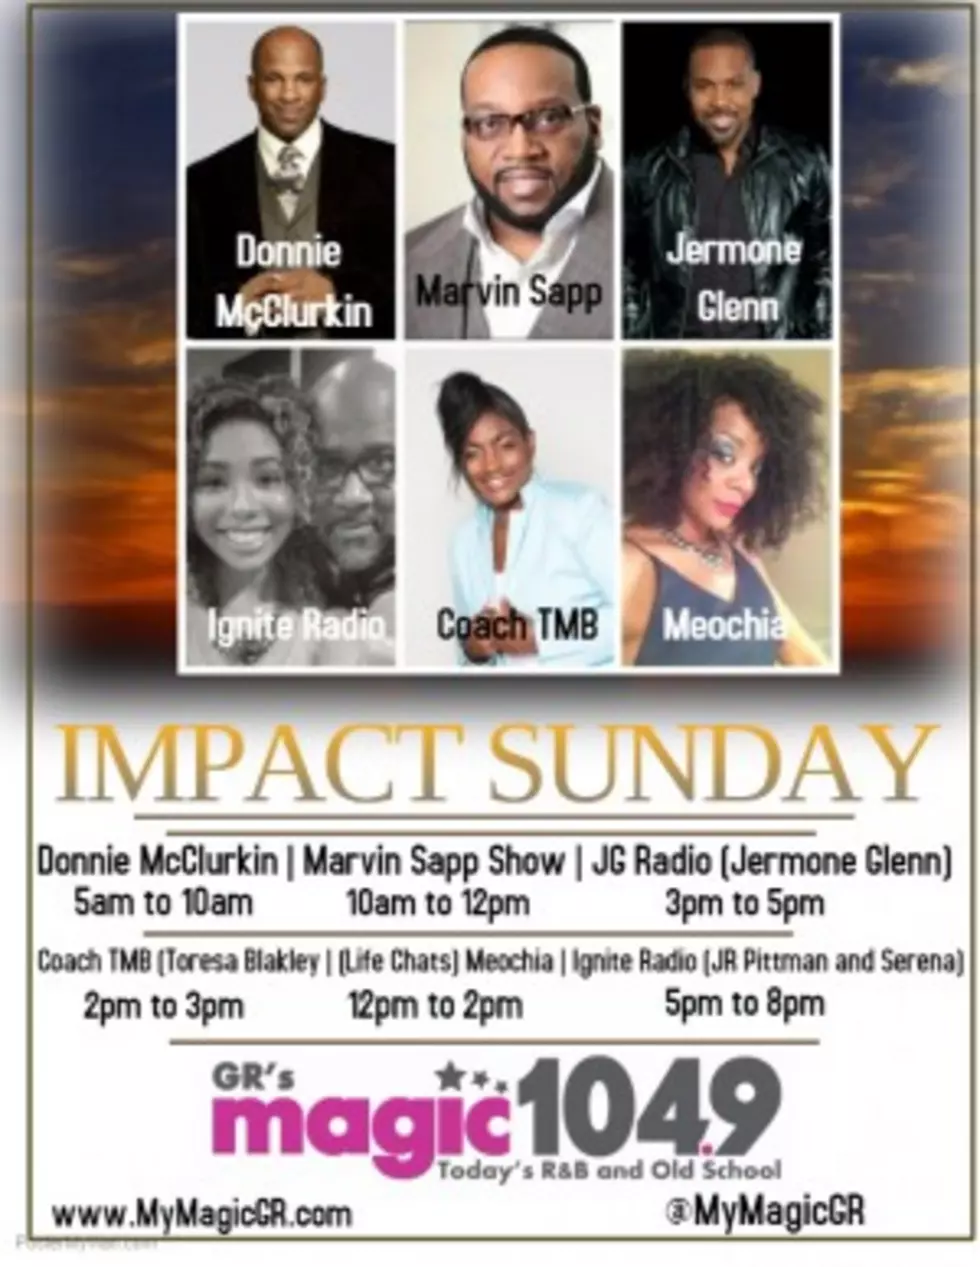 Two new shows to Impact Sunday on MAGIC 104.9